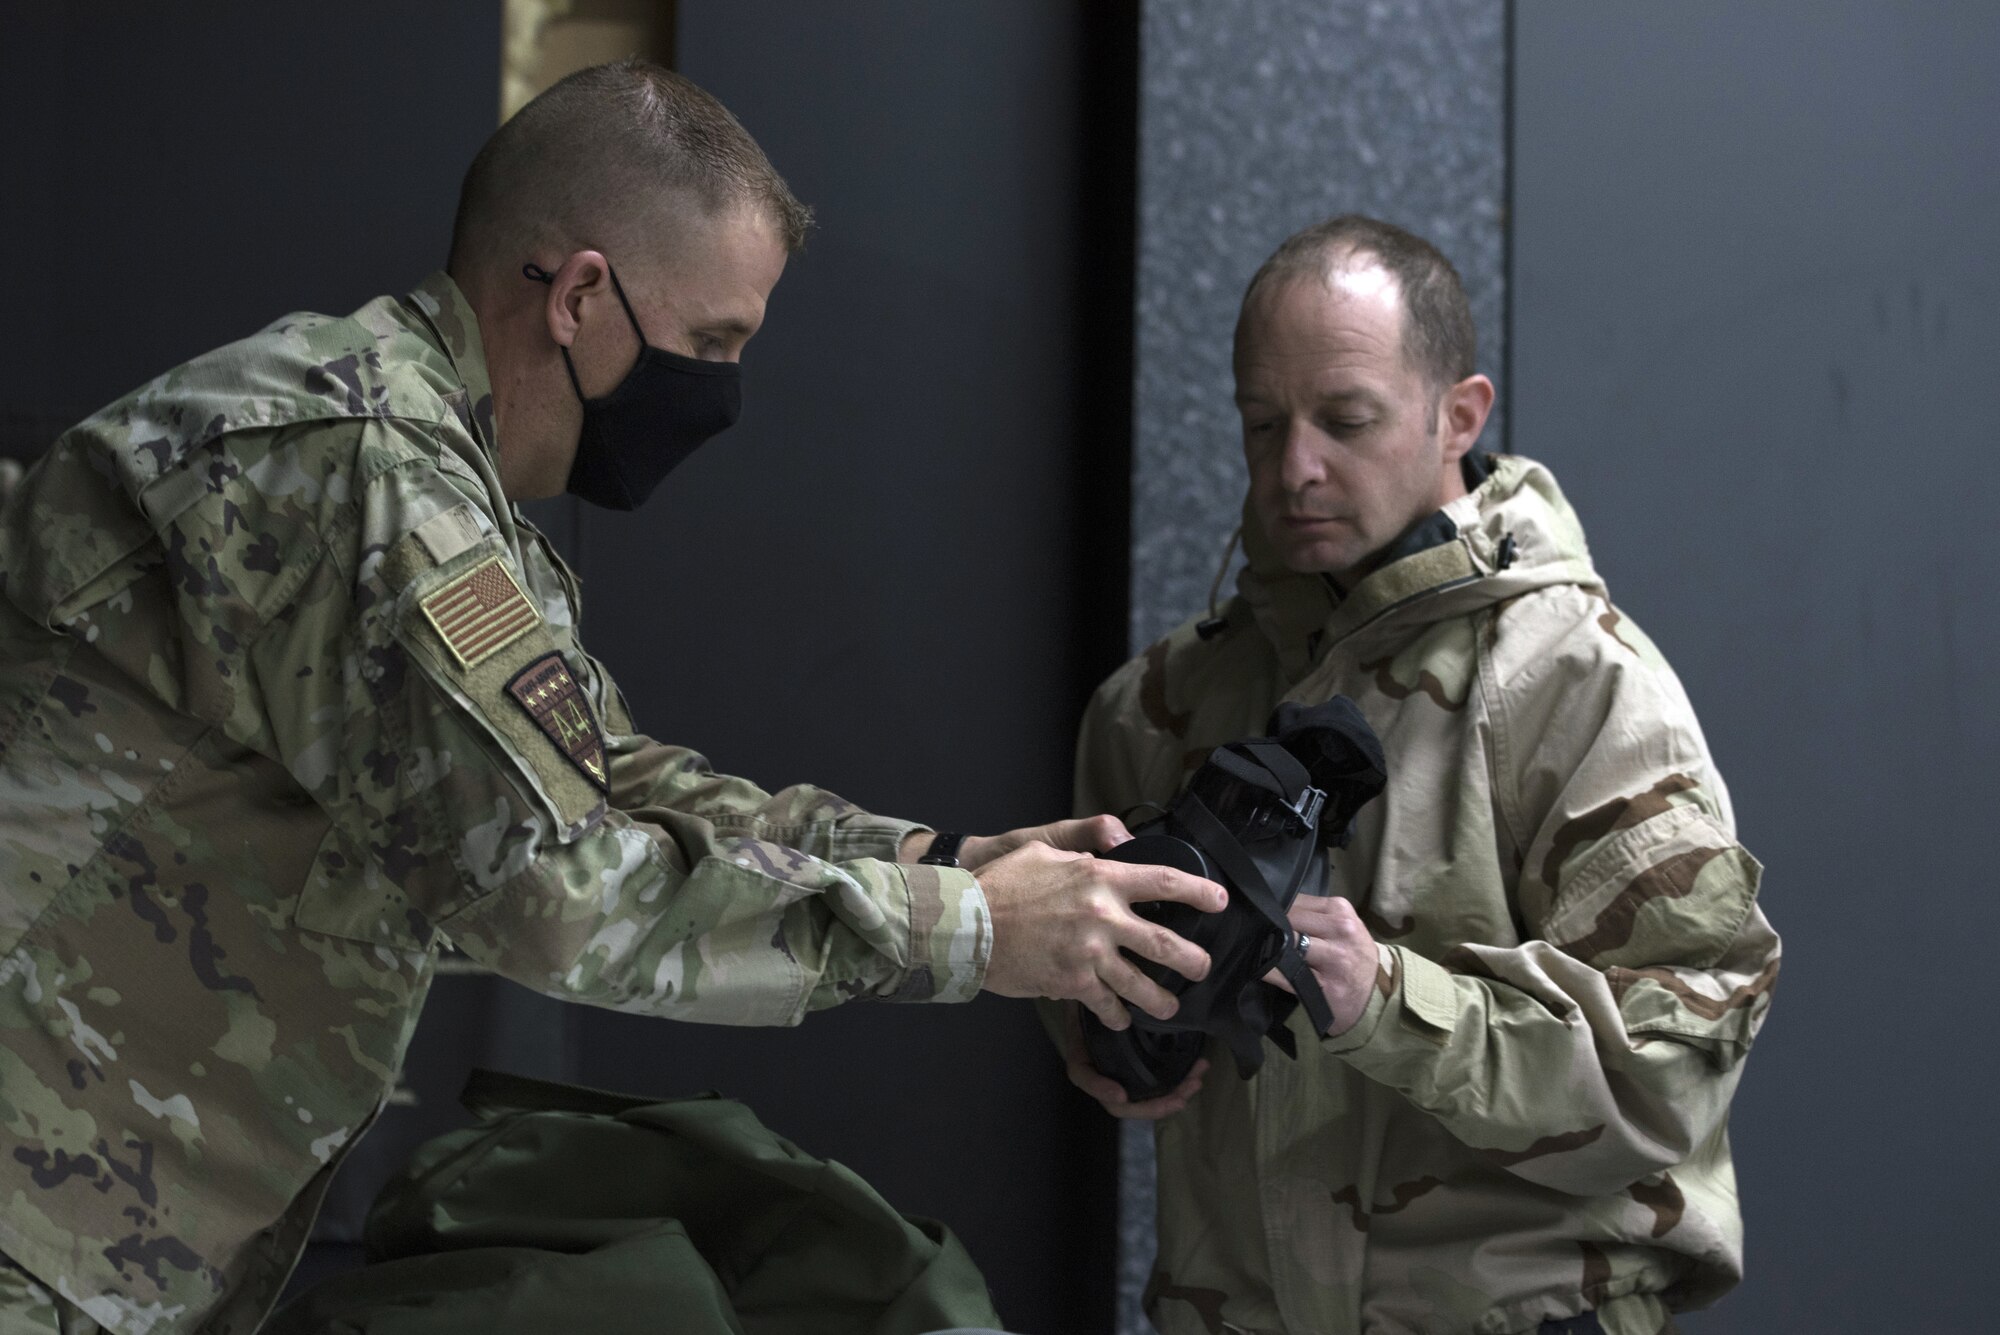 U.S. Air Force Chief Master Sgt. Jason Selman, United States Air Force in Europe-Air Forces Africa Chemical, Biological, Radiological, and Nuclear functional manager, left, and Lt. Col. Boris Shif, chief Intelligence, Surveillance, and Reconnaissance security cooperation division, right, inspect a gas mask together on Ramstein Air Base, Germany, Sept. 24, 2020.